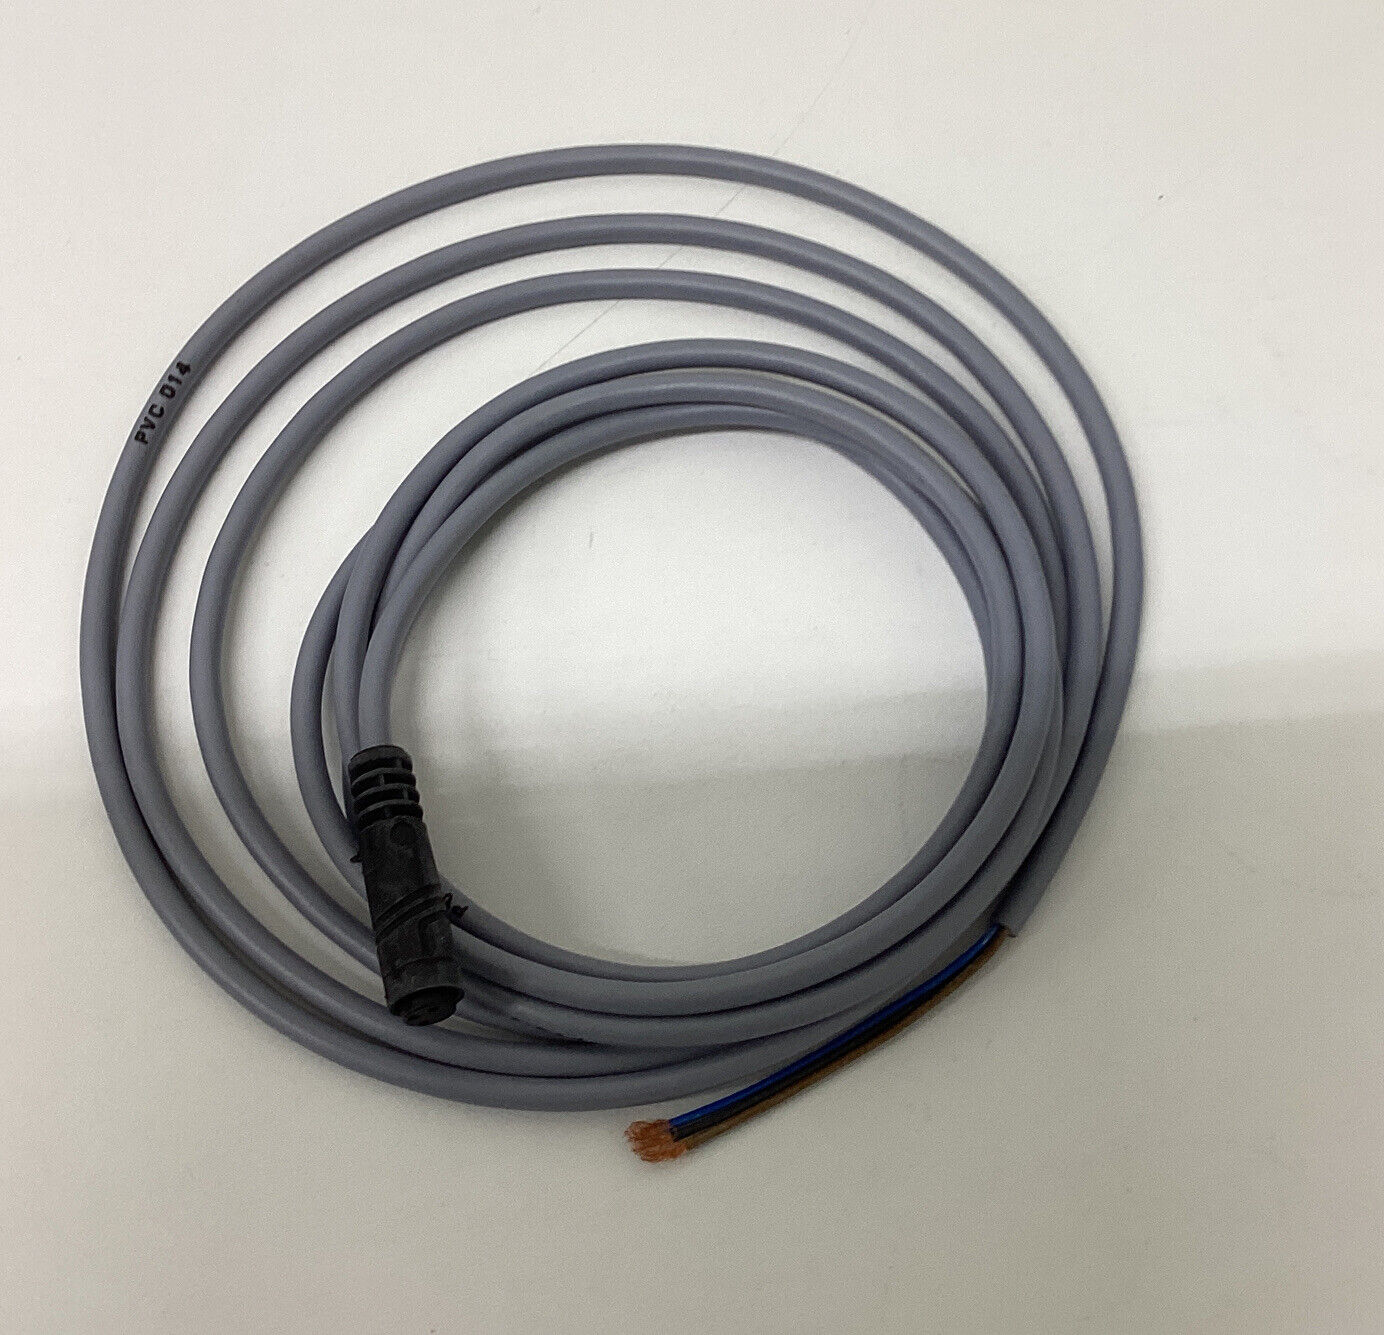 Phd  17533-00-02  3- Pin Wire Cordset  (CL260)